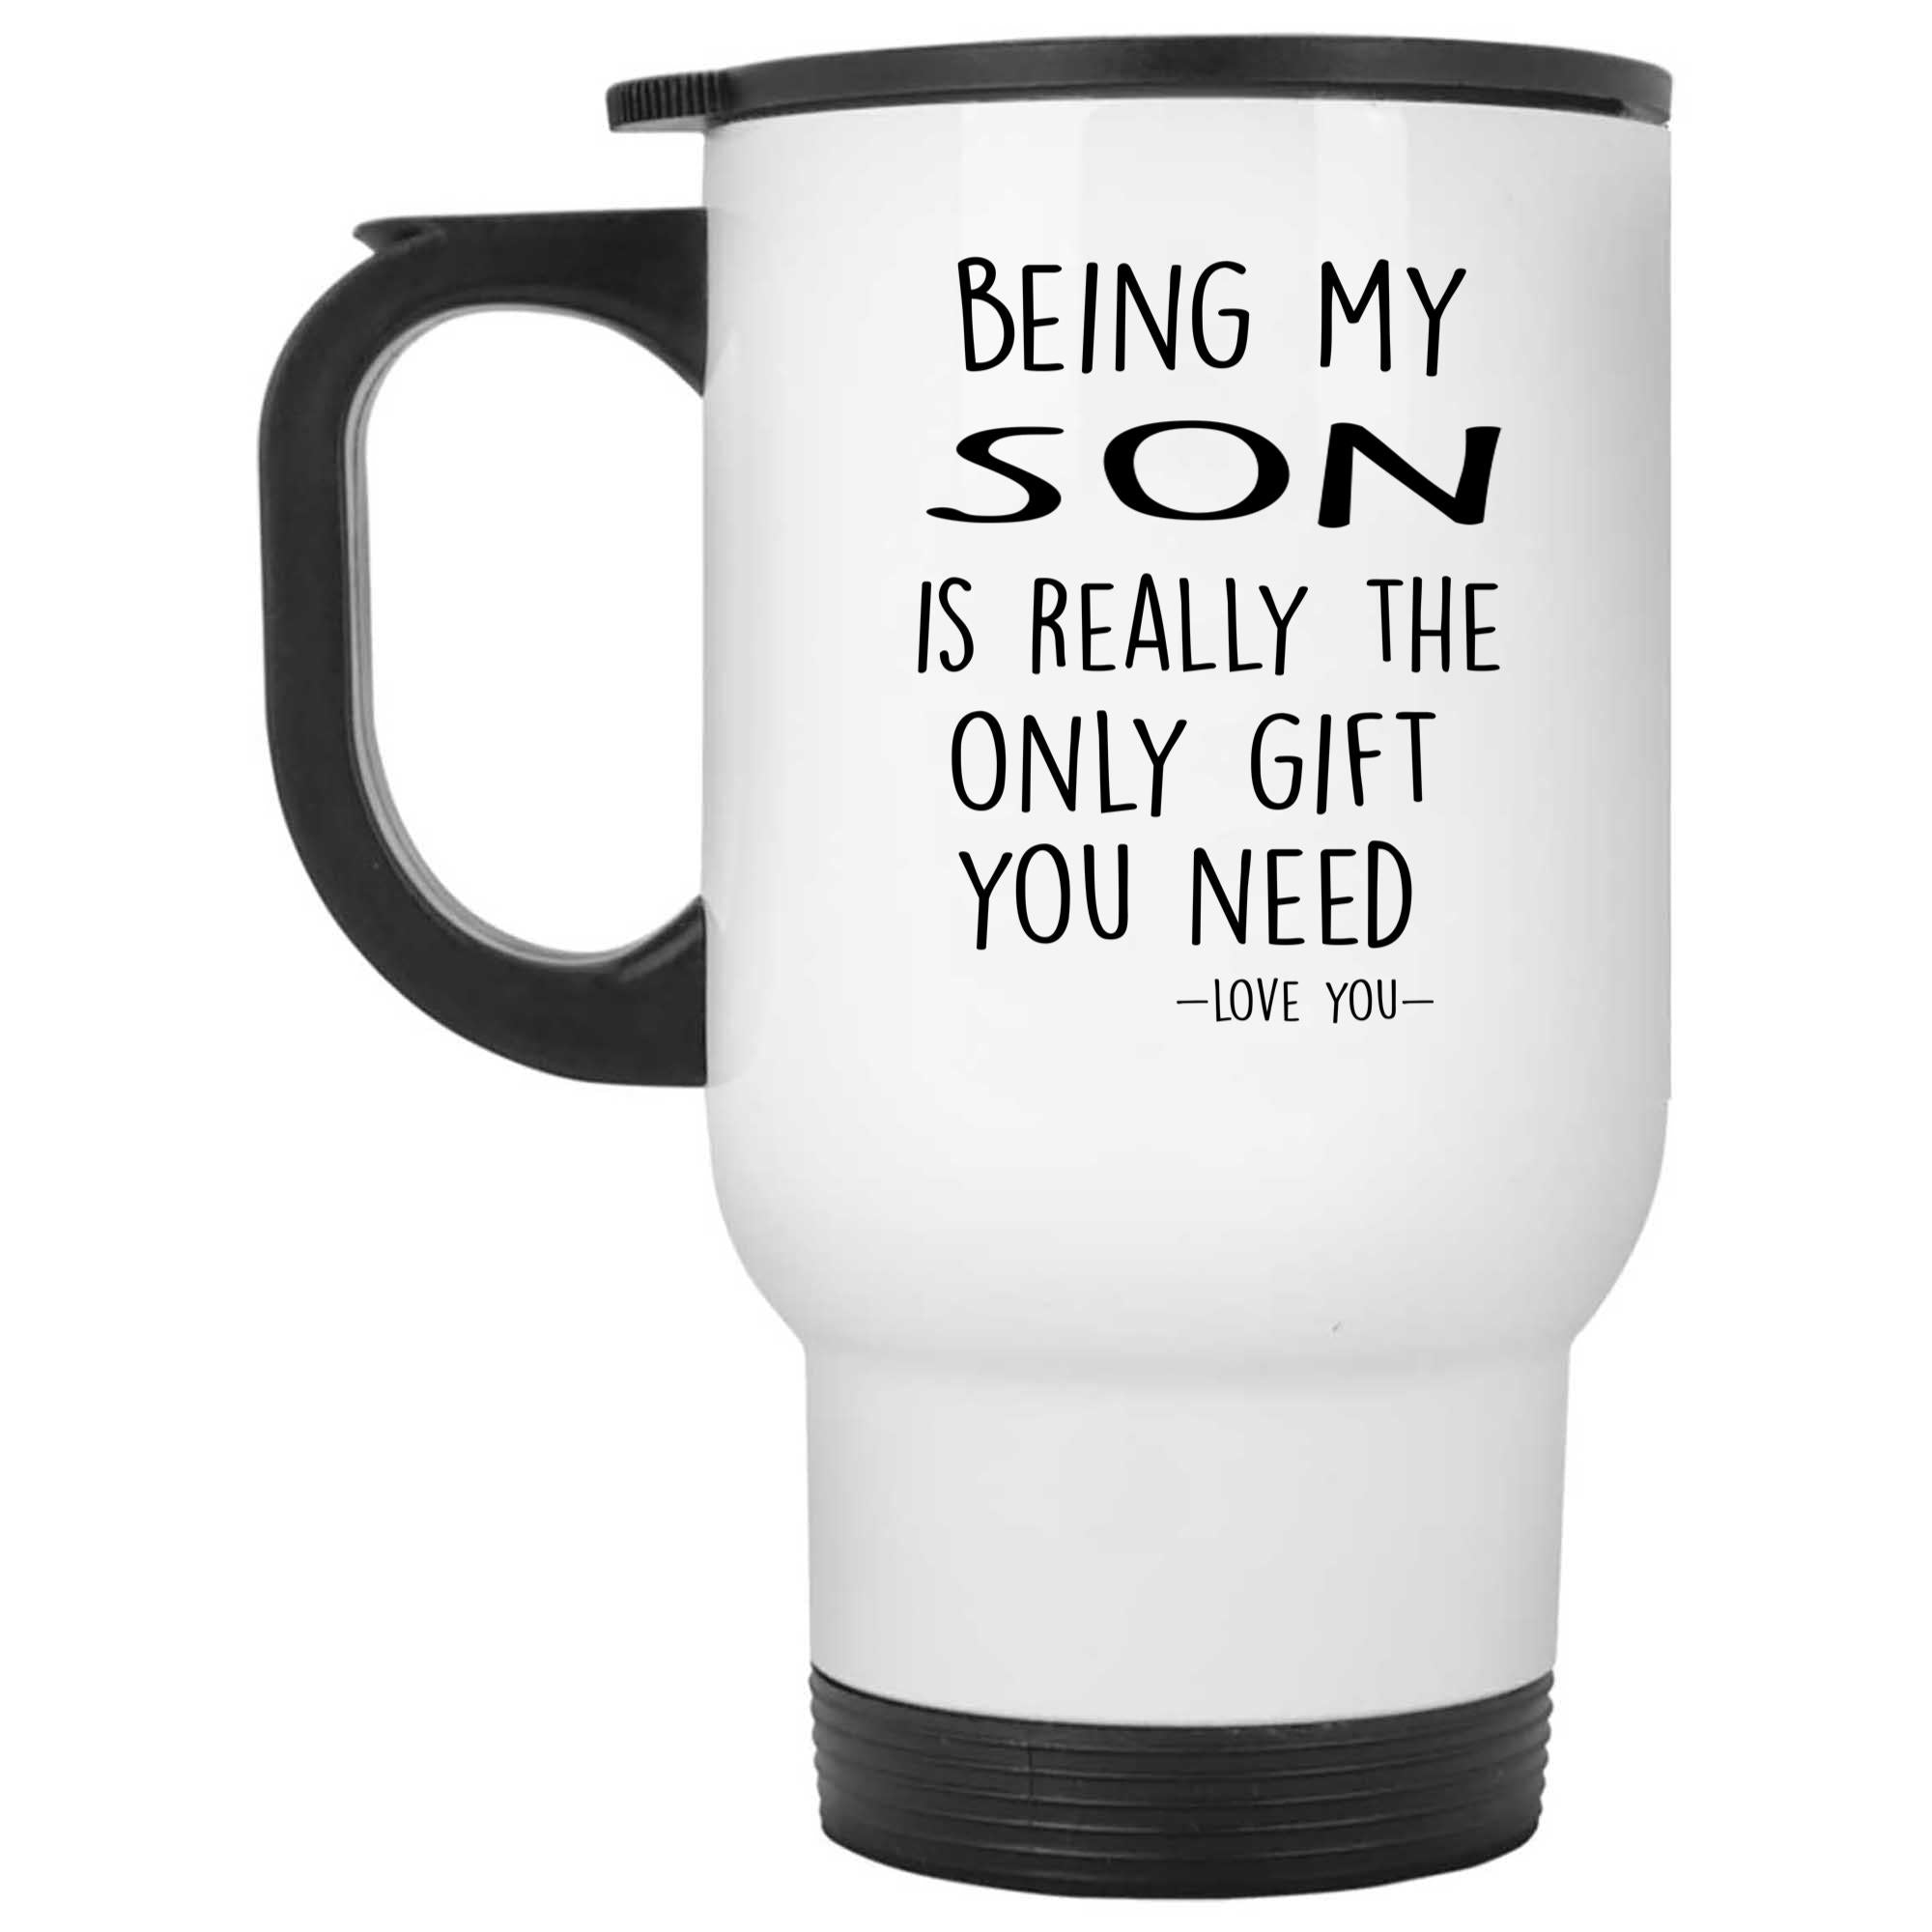 Skitongifts Funny Ceramic Novelty Coffee Mug Being My Son Is Really The Only You Need  Love You Son Funny 0vSYDJB